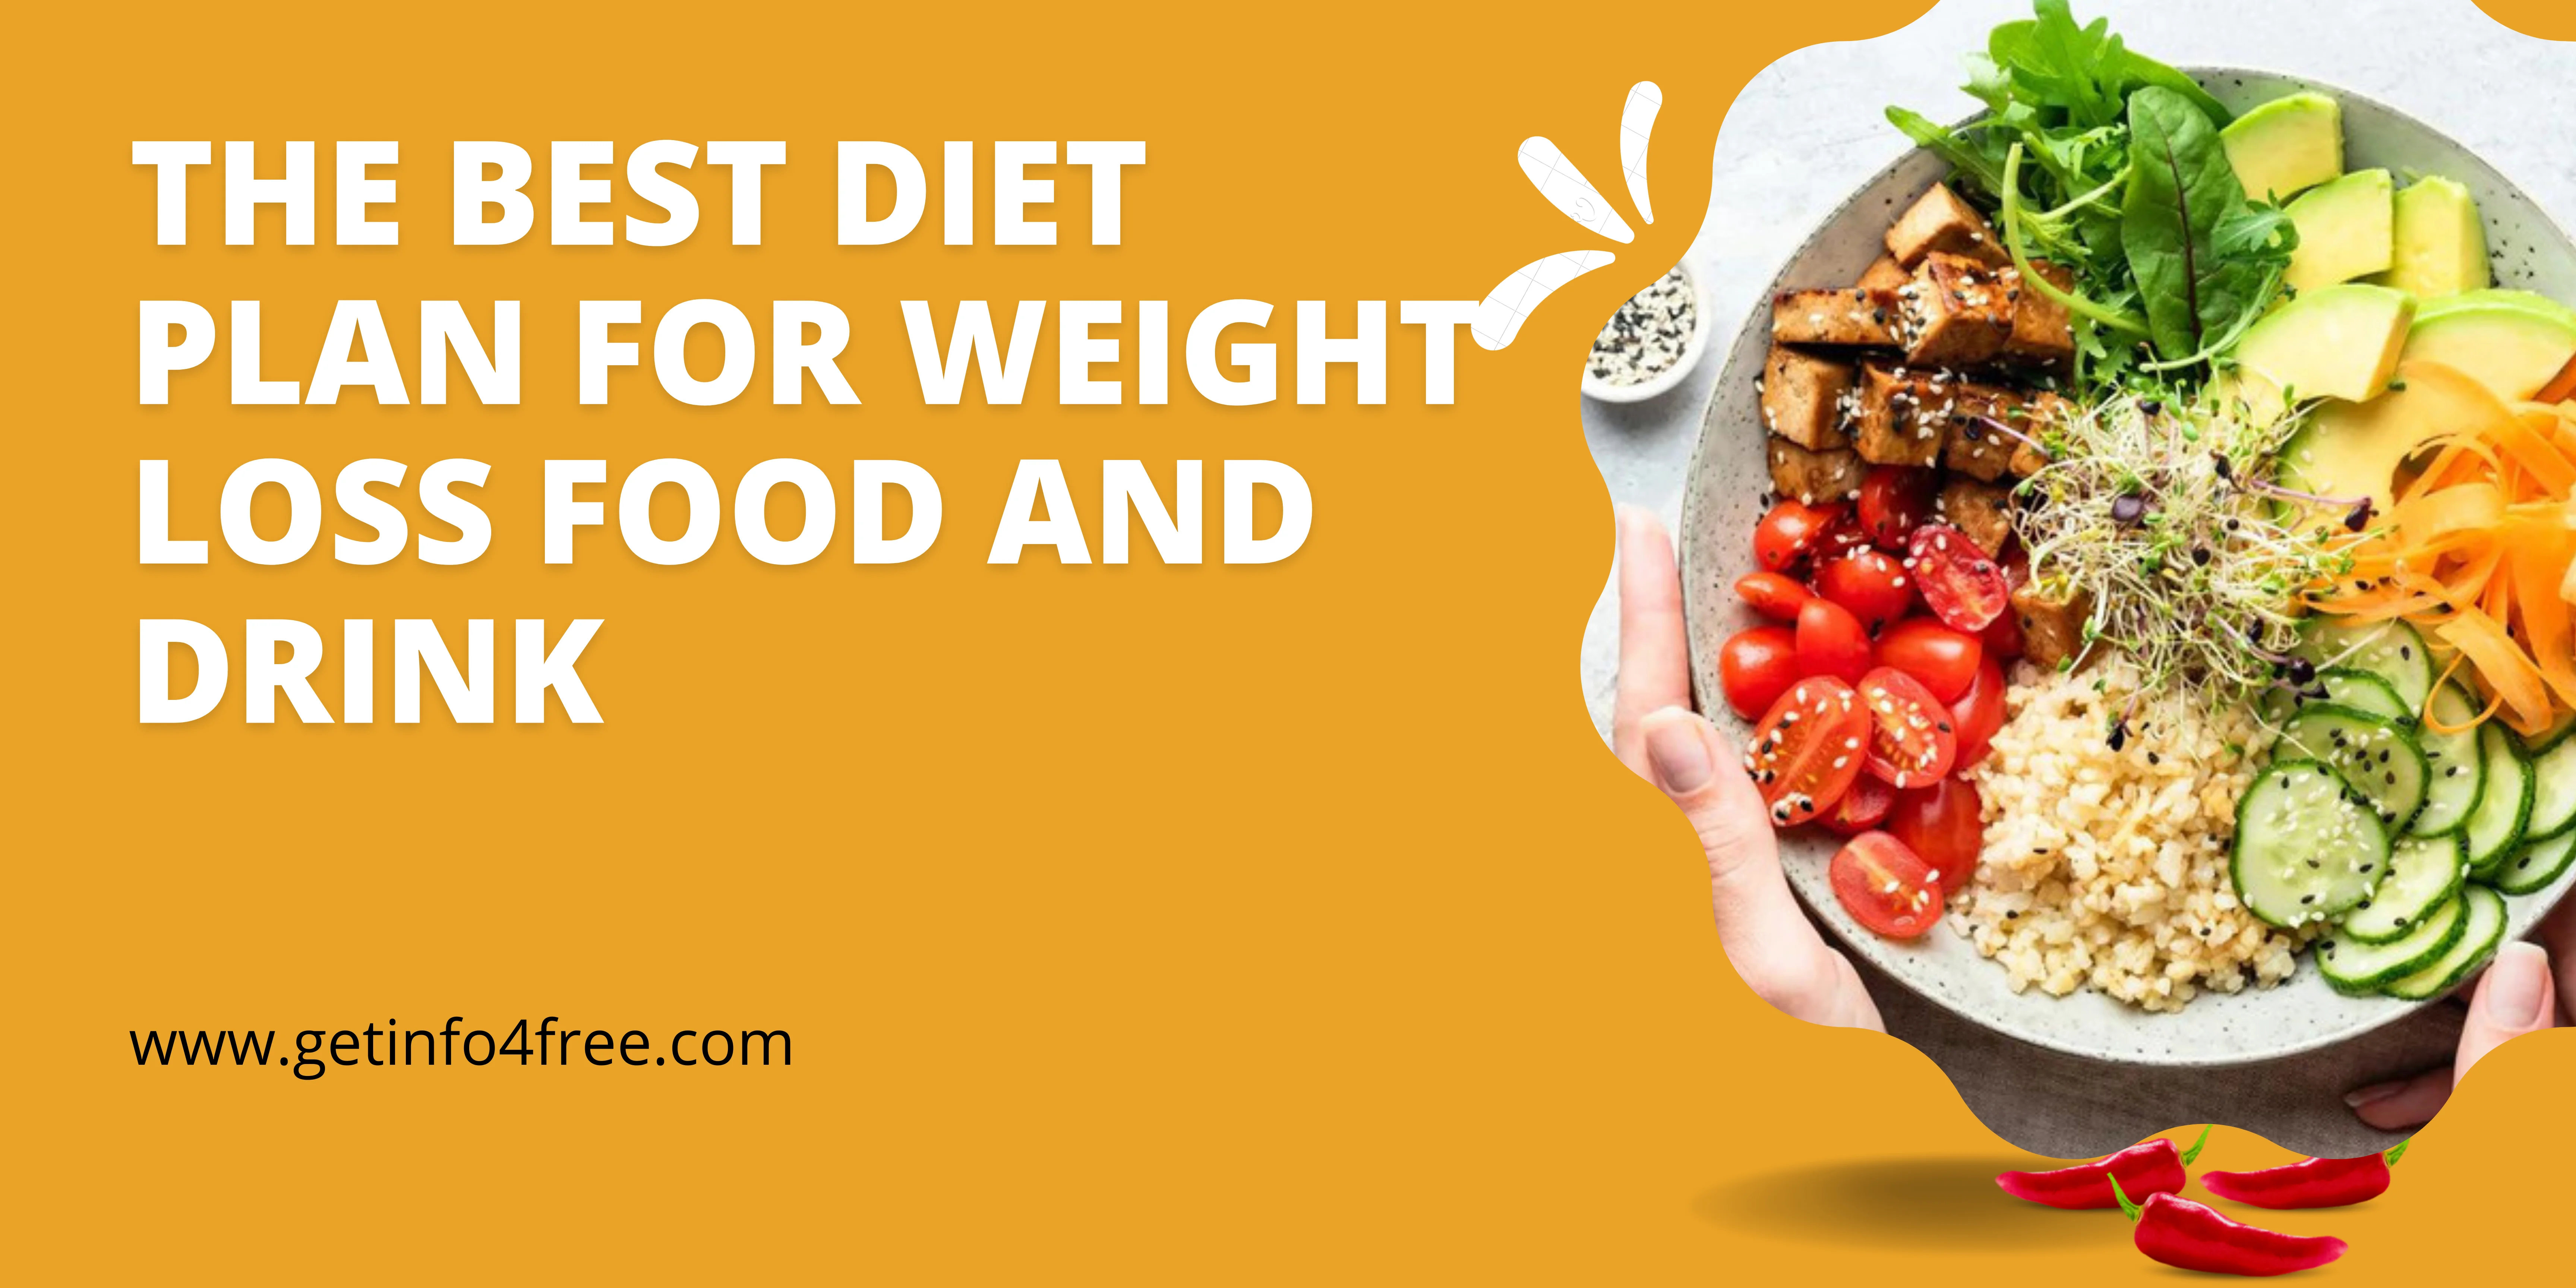 The Best Diet Plan for Weight Loss Food and Drink